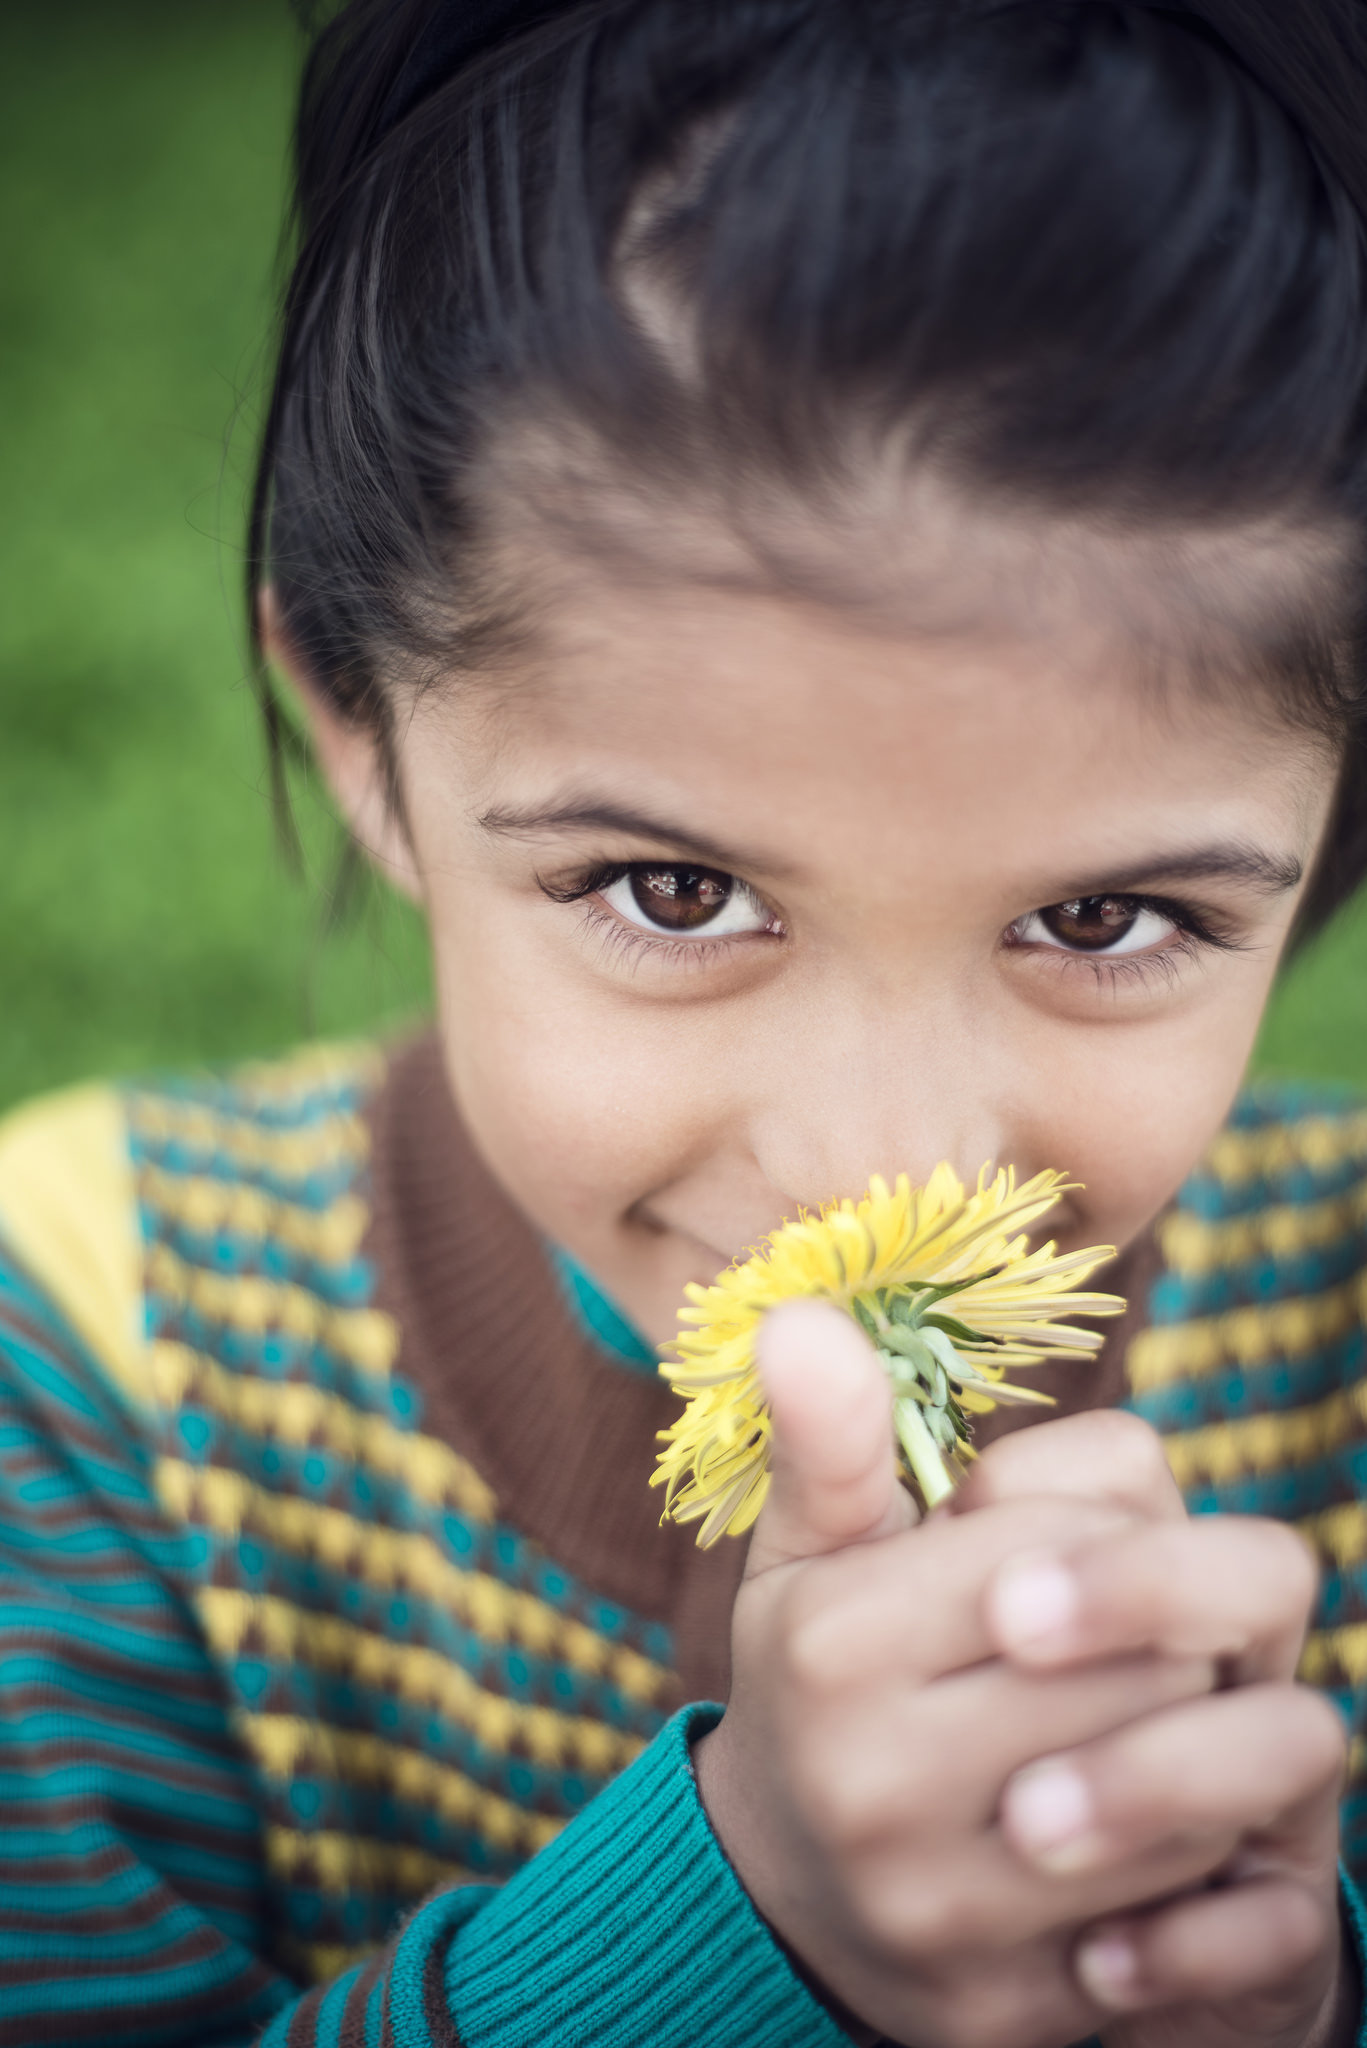 CRDT-kidhappy-12, outdoors, diversity, smile, nature, spring, flowers